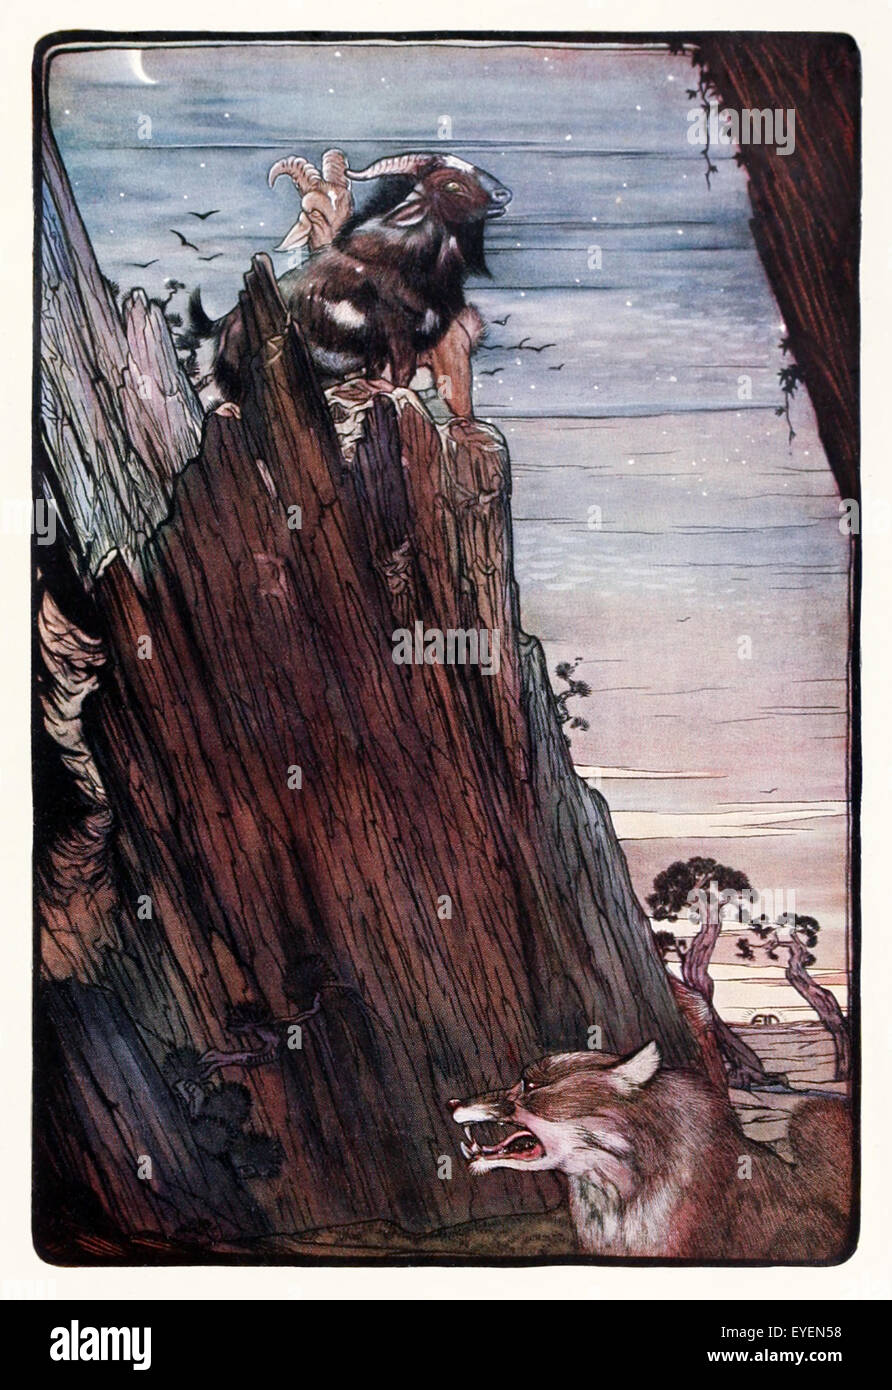 'The Wolf and the Goat' fable by Aesop (circa 600BC). A wolf tries to persuade a goat on a cliff to come down and feast on the tender grass below. An invitation prompted by selfishness is not to be accepted. Illustration by Edward J. Detmold (1883-1957). See description for more information. Stock Photo